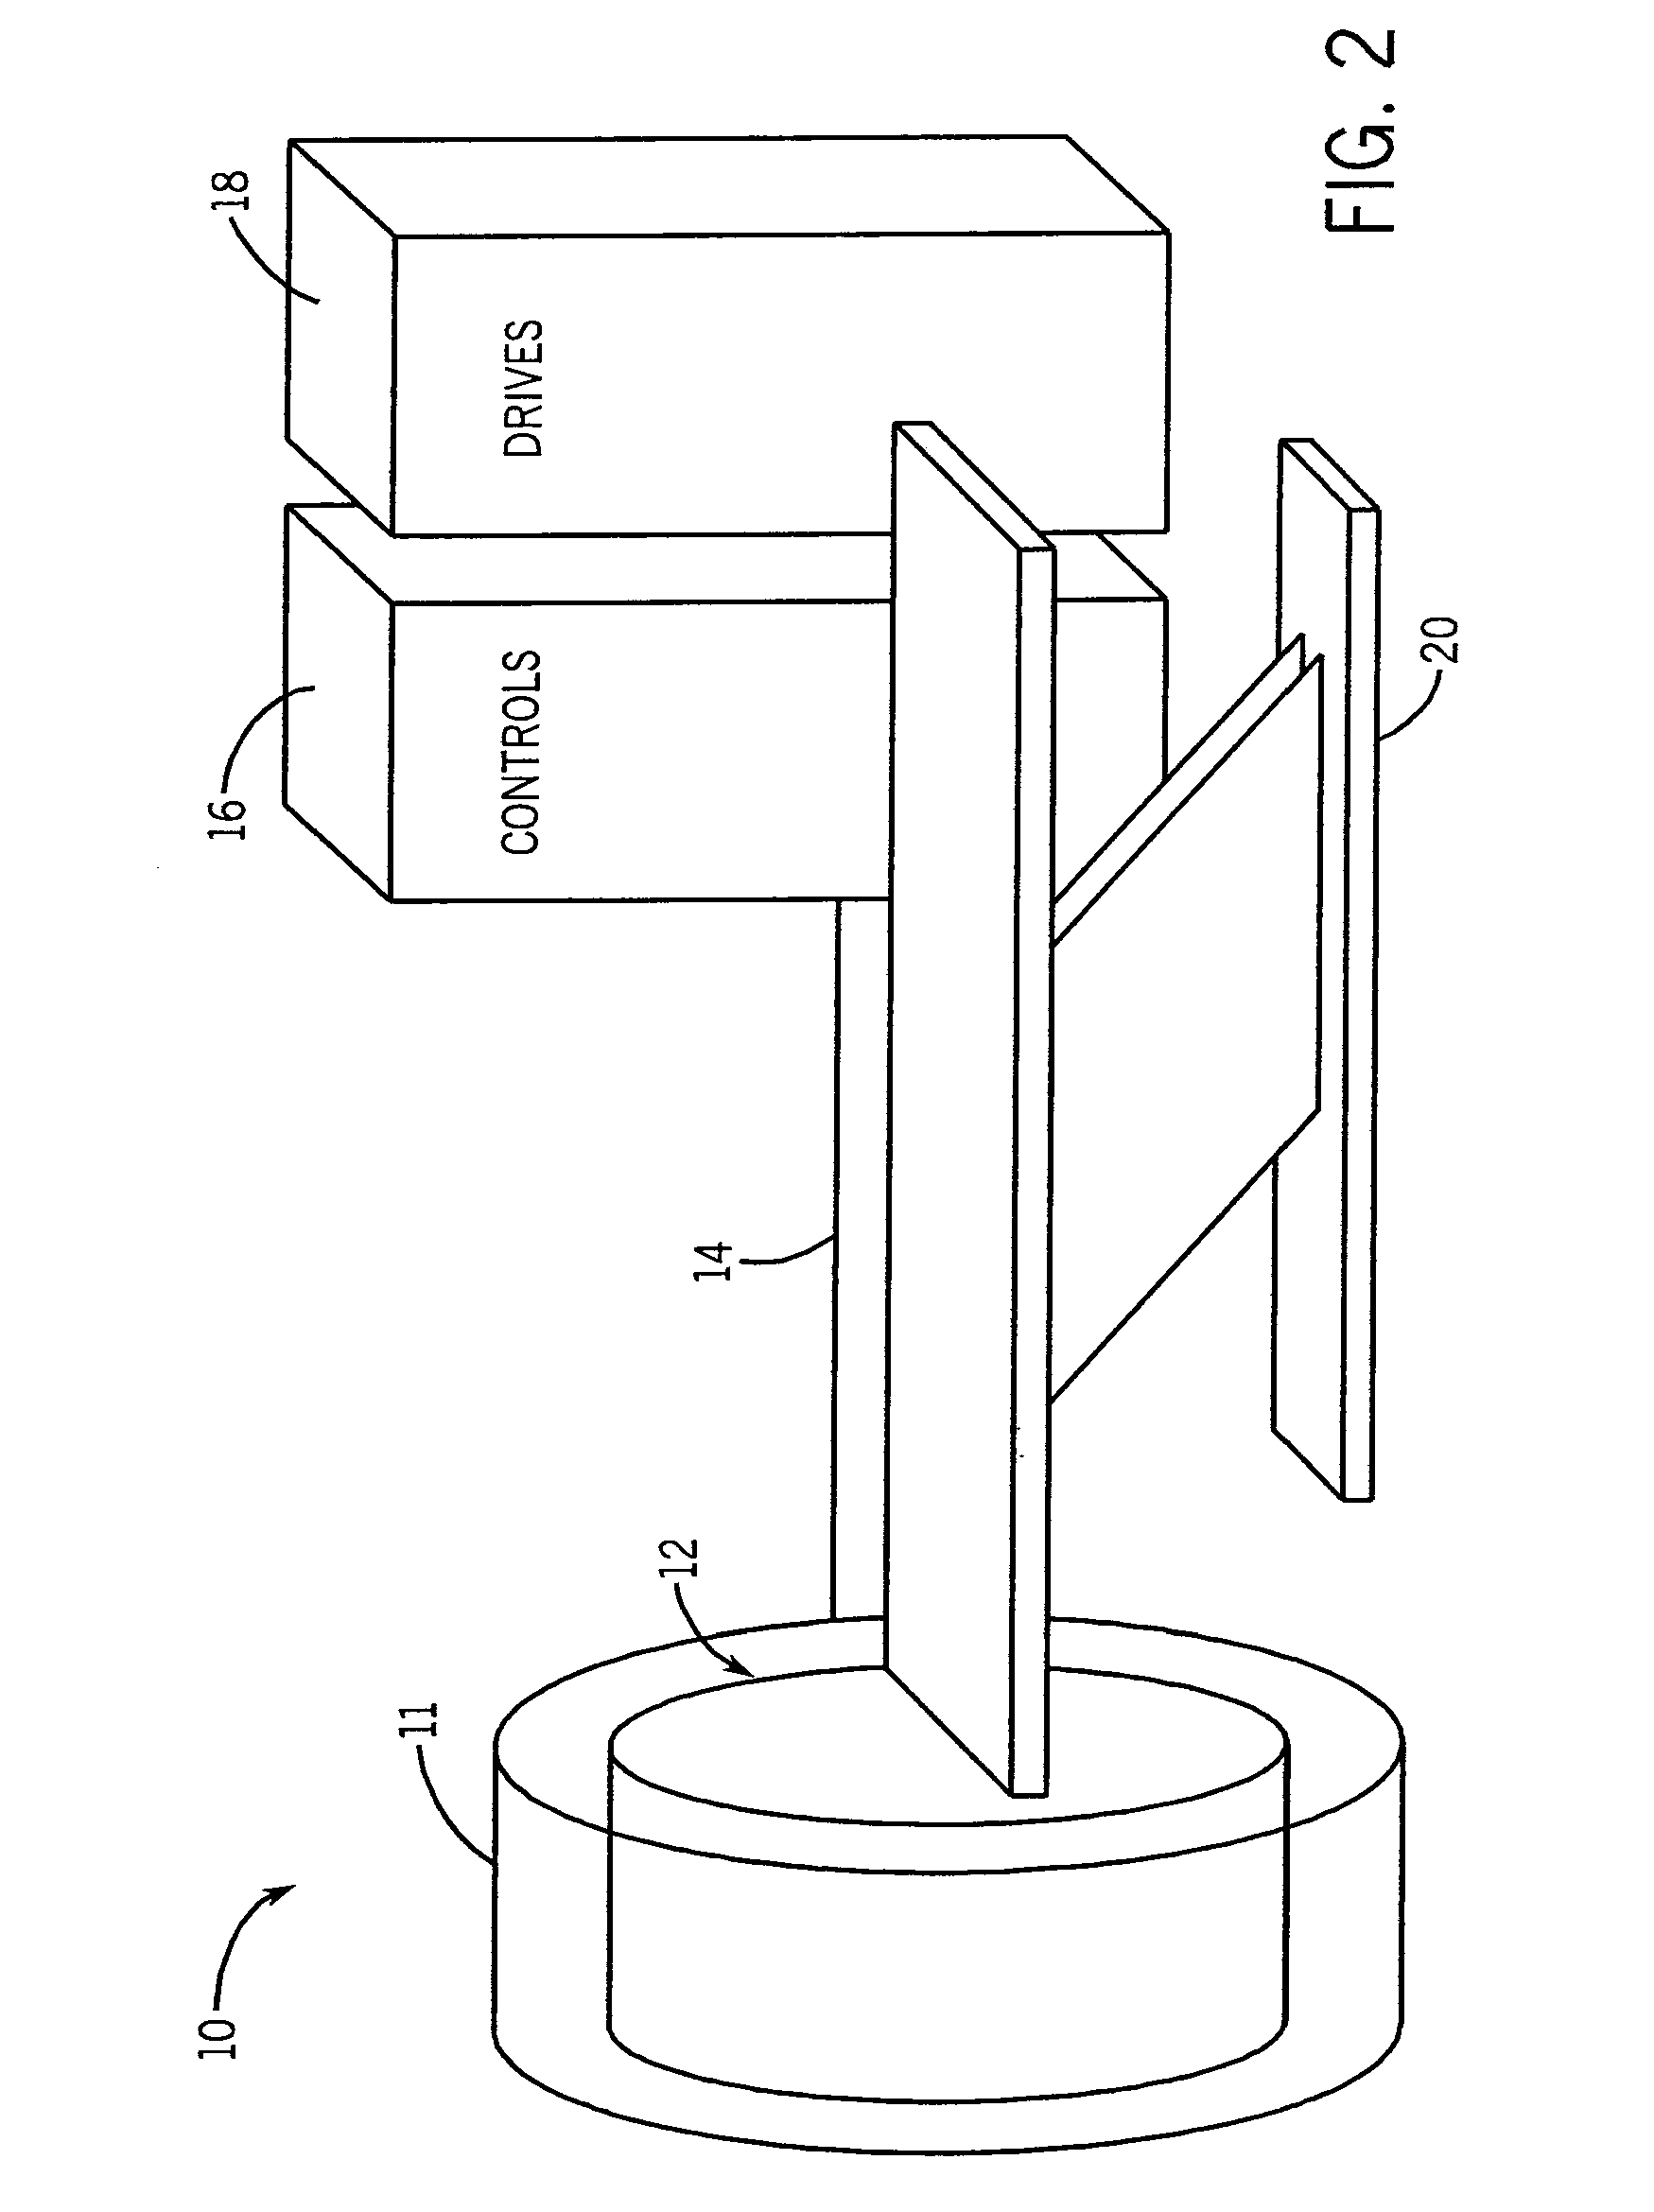 System and method for convergent light therapy having controllable dosimetry